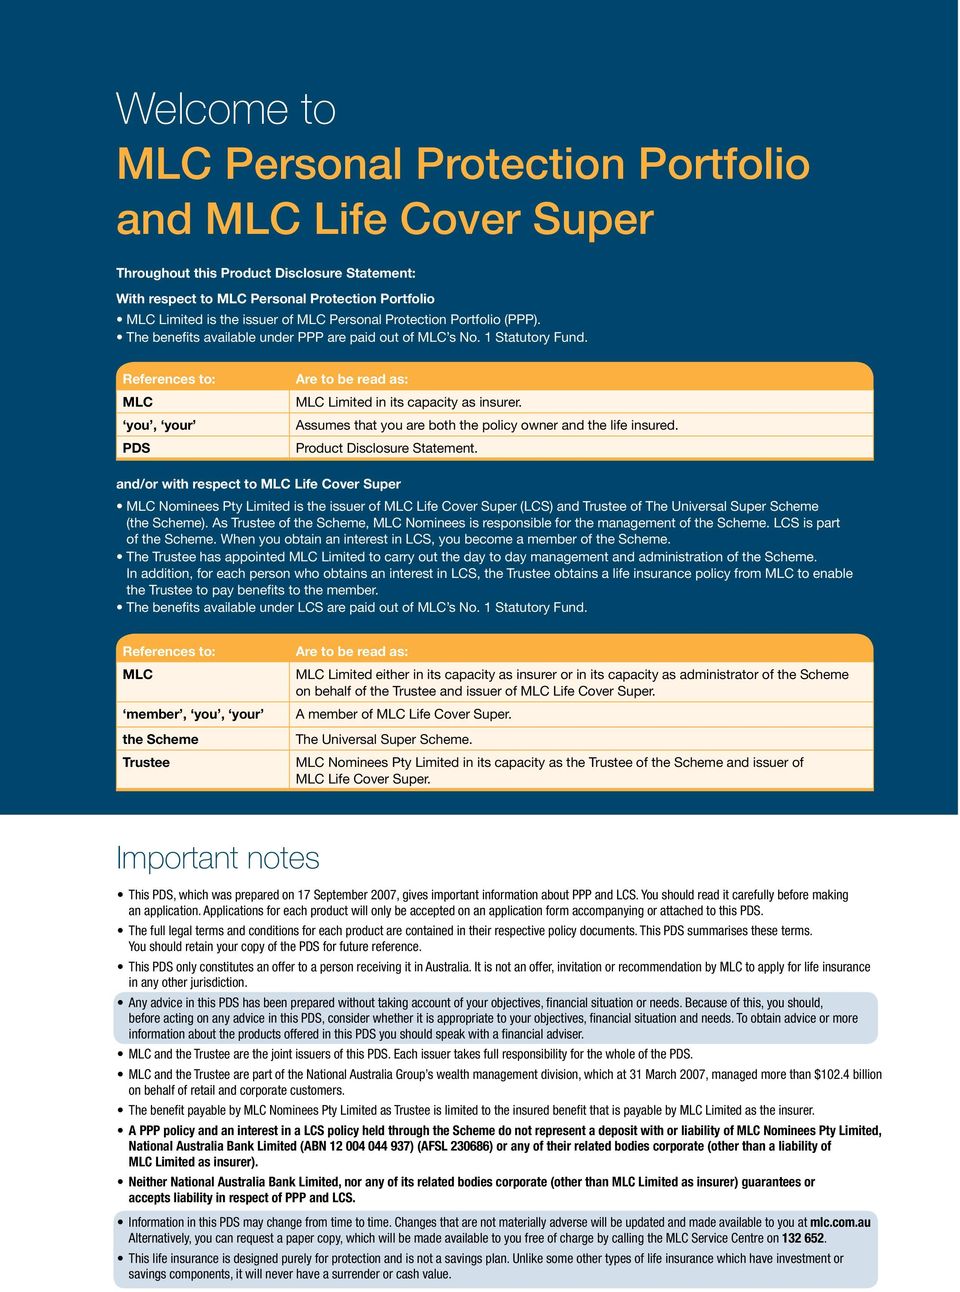 References to: MLC you, your PDS Are to be read as: MLC Limited in its capacity as insurer. Assumes that you are both the policy owner and the life insured. Product Disclosure Statement.